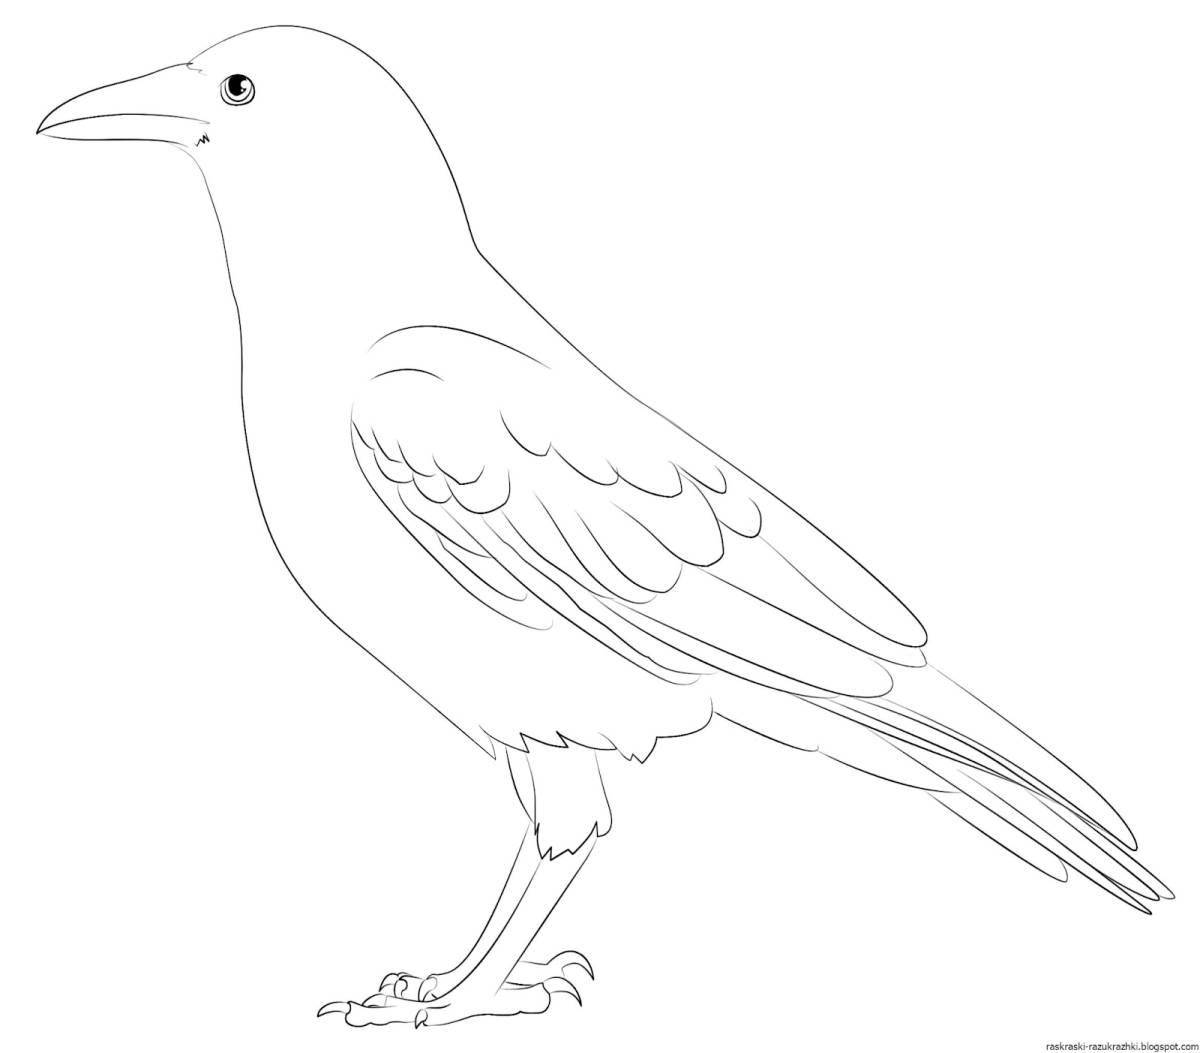 Children's jackdaw coloring book for kids